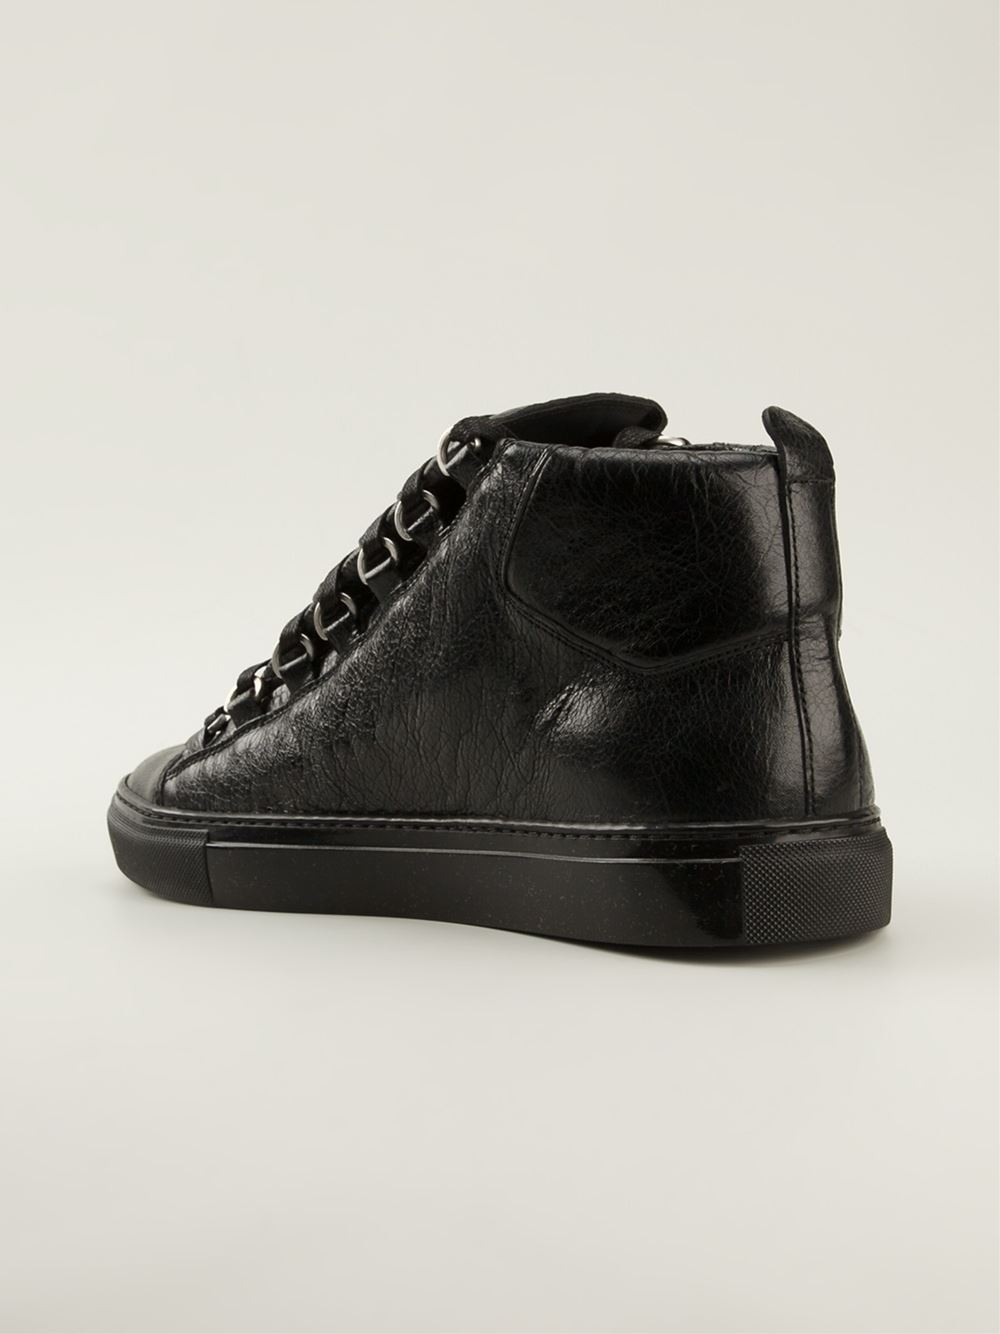 Balenciaga Arena High-Top Leather Trainers in Black for Men - Lyst